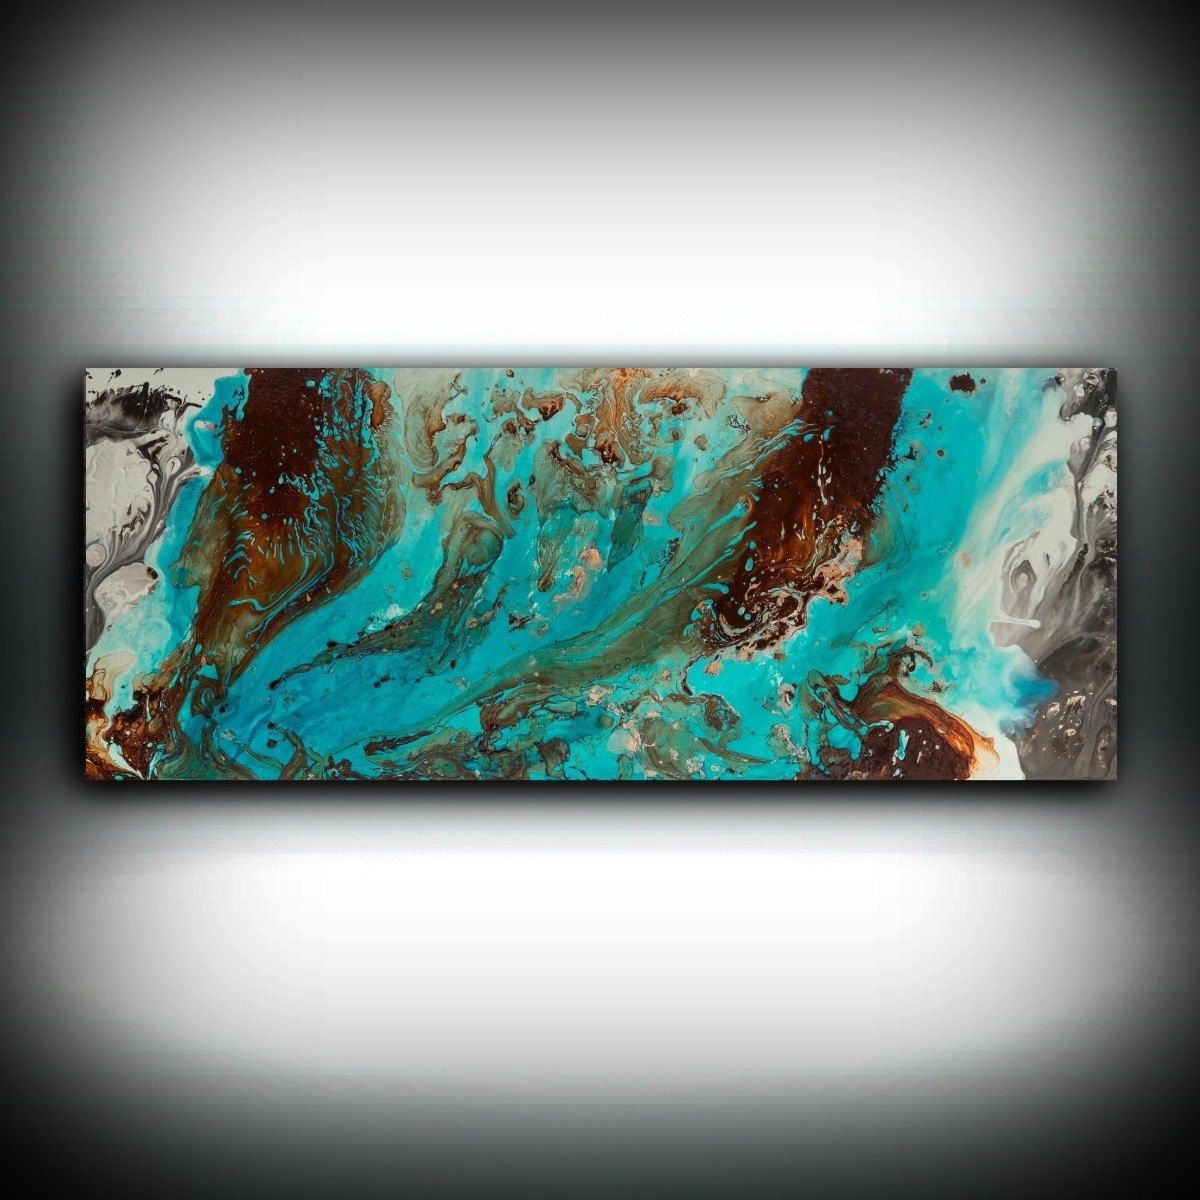 Best Turquoise And Brown Wall Decor Luxury Art Ideas Design Teal Regarding 2017 Teal And Brown Wall Art (View 11 of 20)